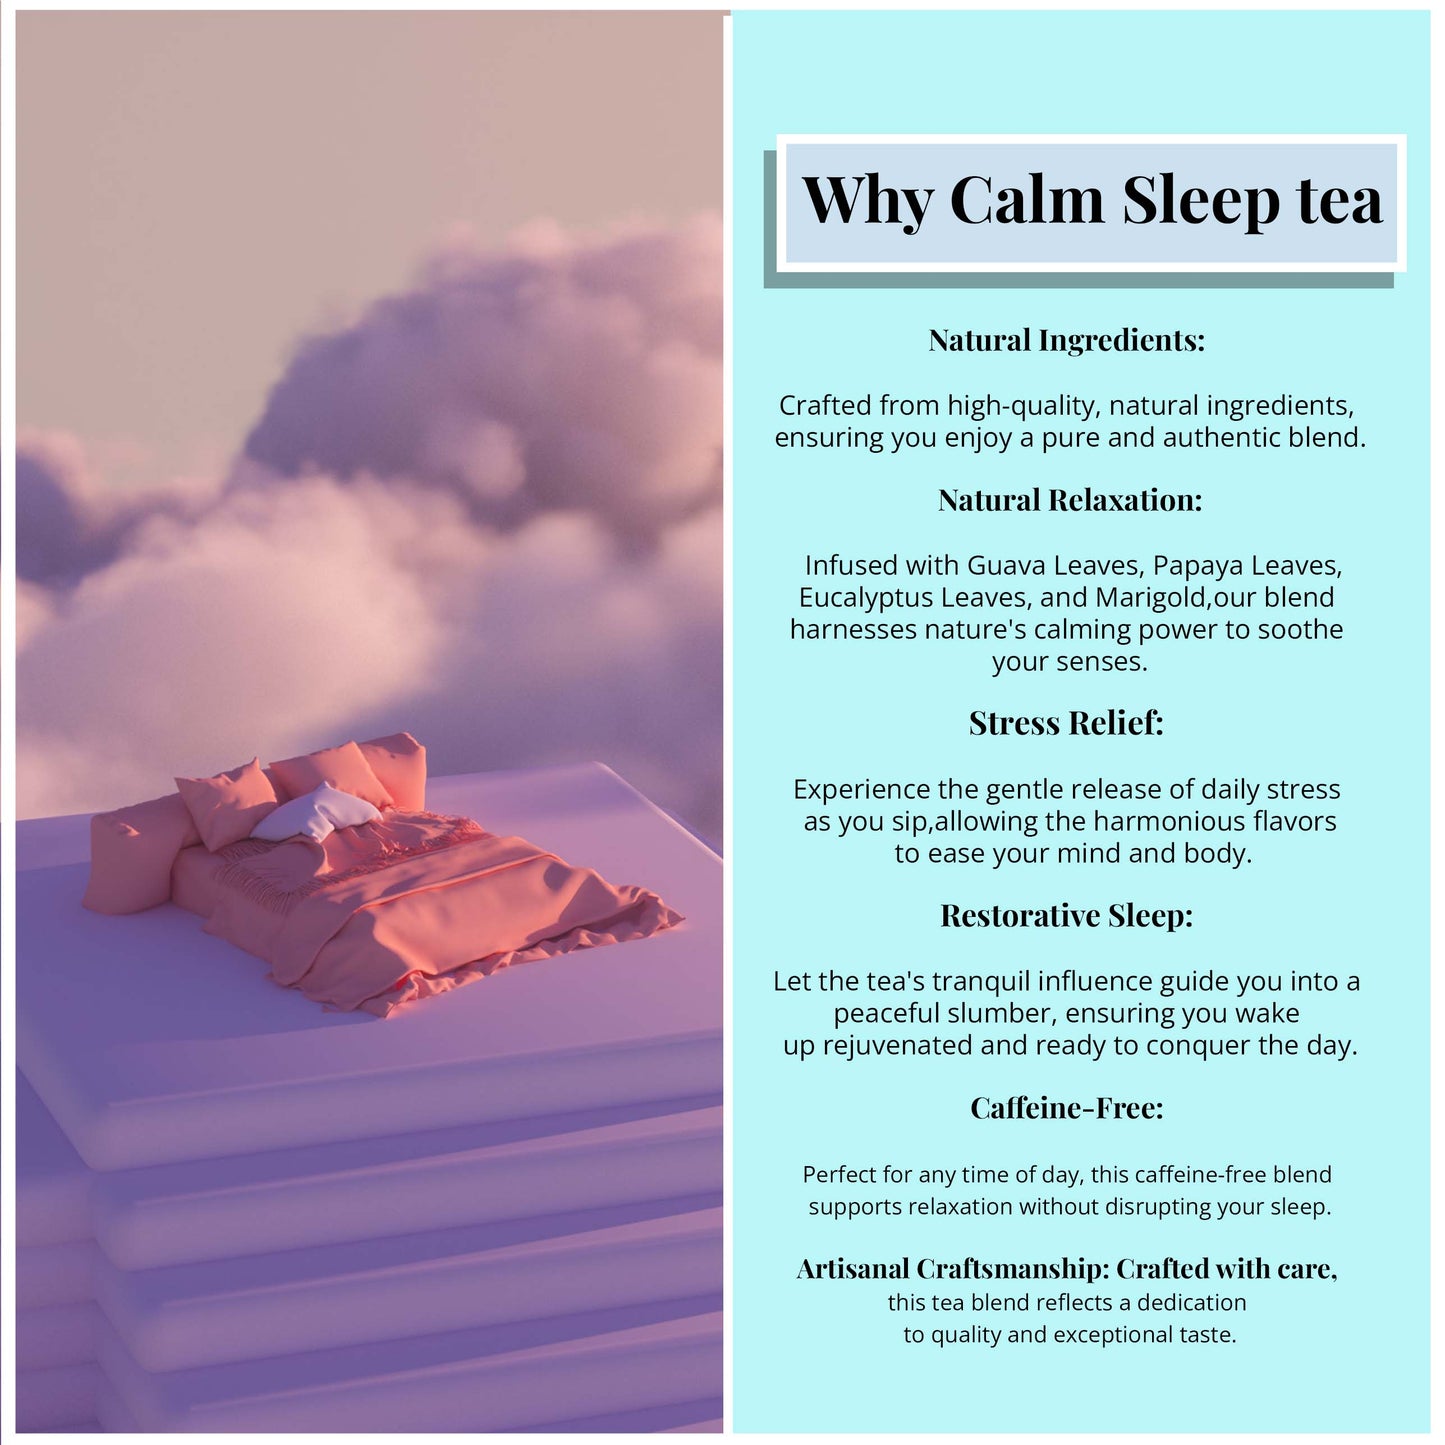 
                  
                    Why calm sleep tea ? Natural and organic ingredients , Infused with Guava leaves , Papaya Leaves, Eucalyptus Leaves and Marigold, Our blend harness nature's calming power to soothe your senses. Stress Relief : Experience the gentle release of daily stress as you sip, allowing the harmonious flavors to ease your mind and body.
                  
                